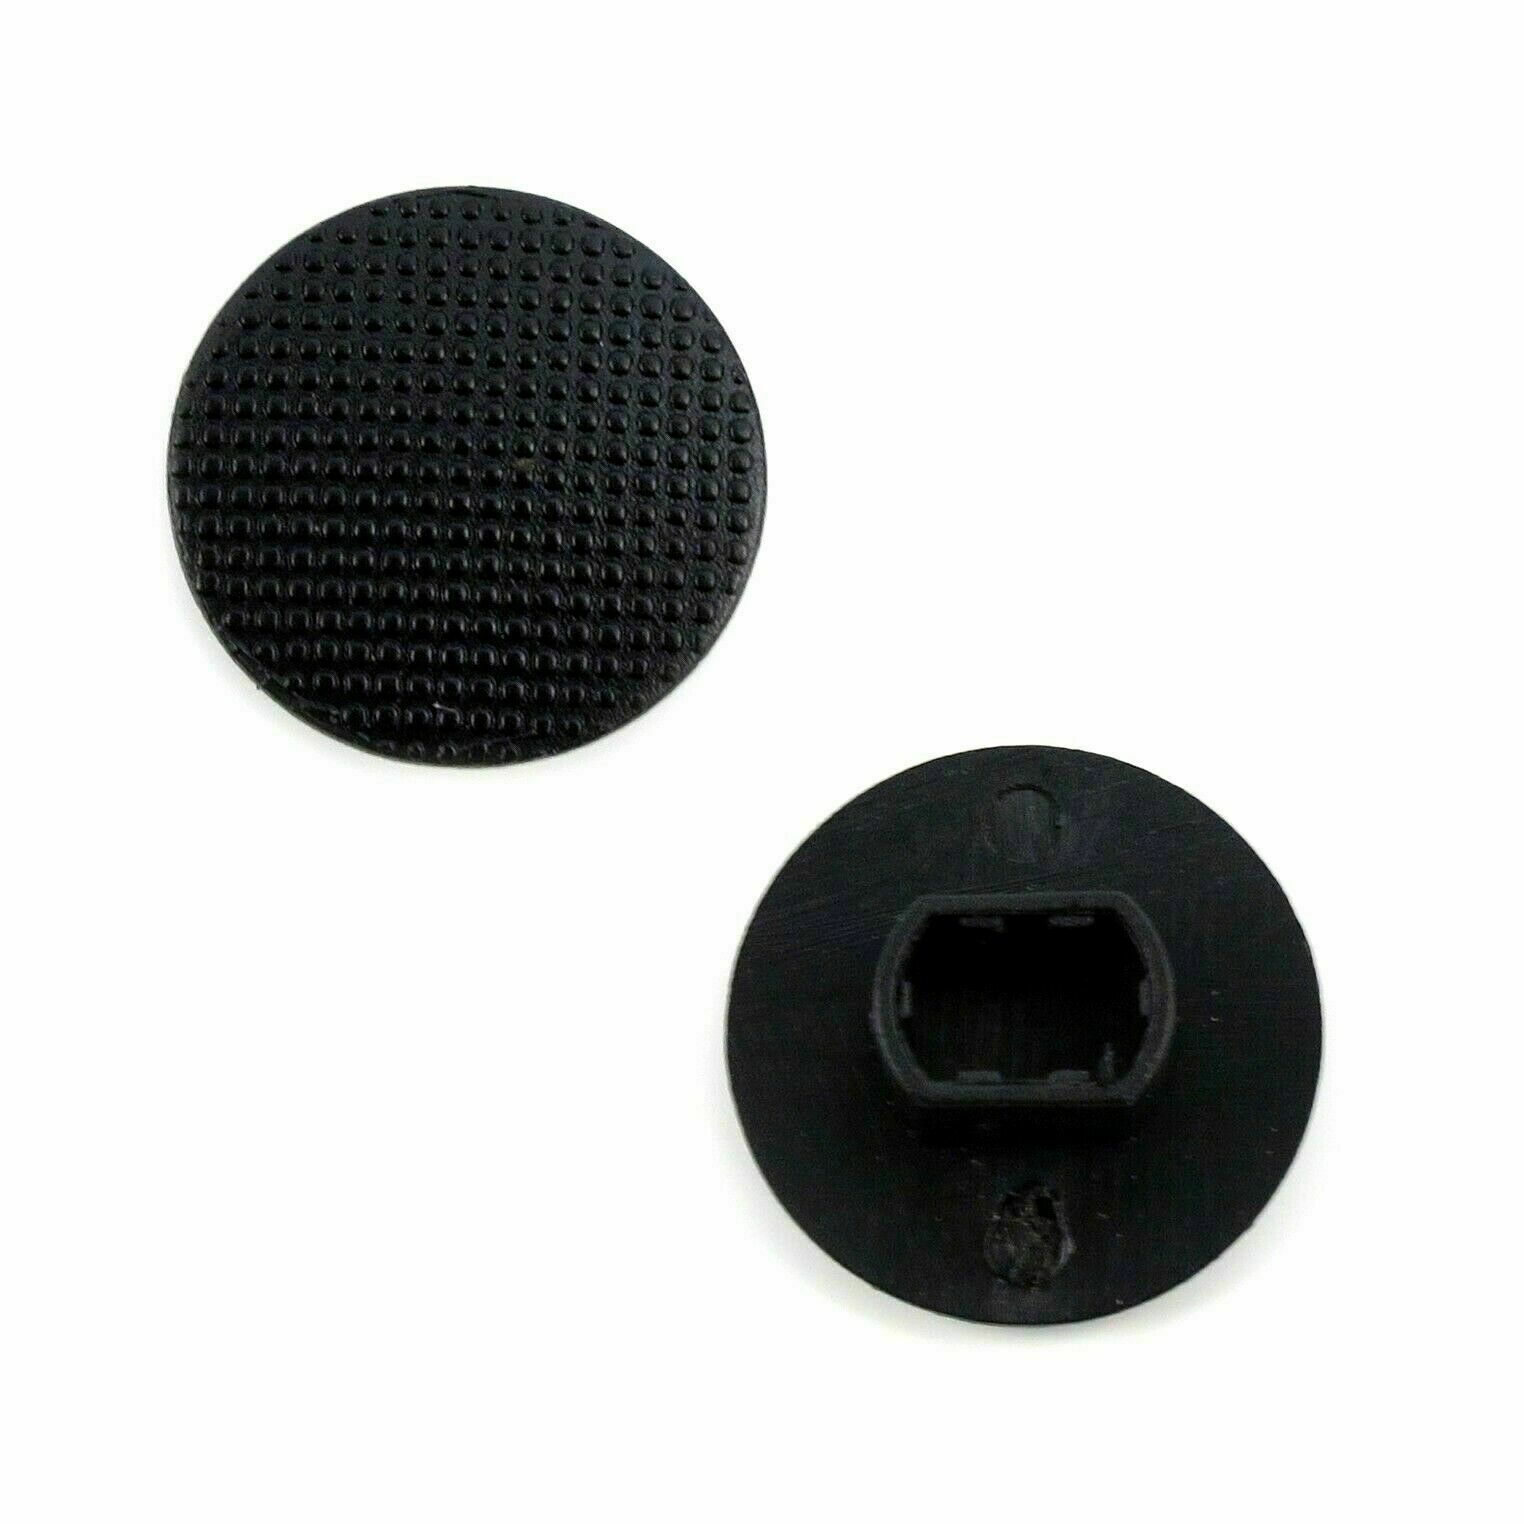 3Pcs Black Analog Joystick Stick Cap Cover Thumb Button For PSP 1000 1001 Unbranded Does not apply - фотография #3